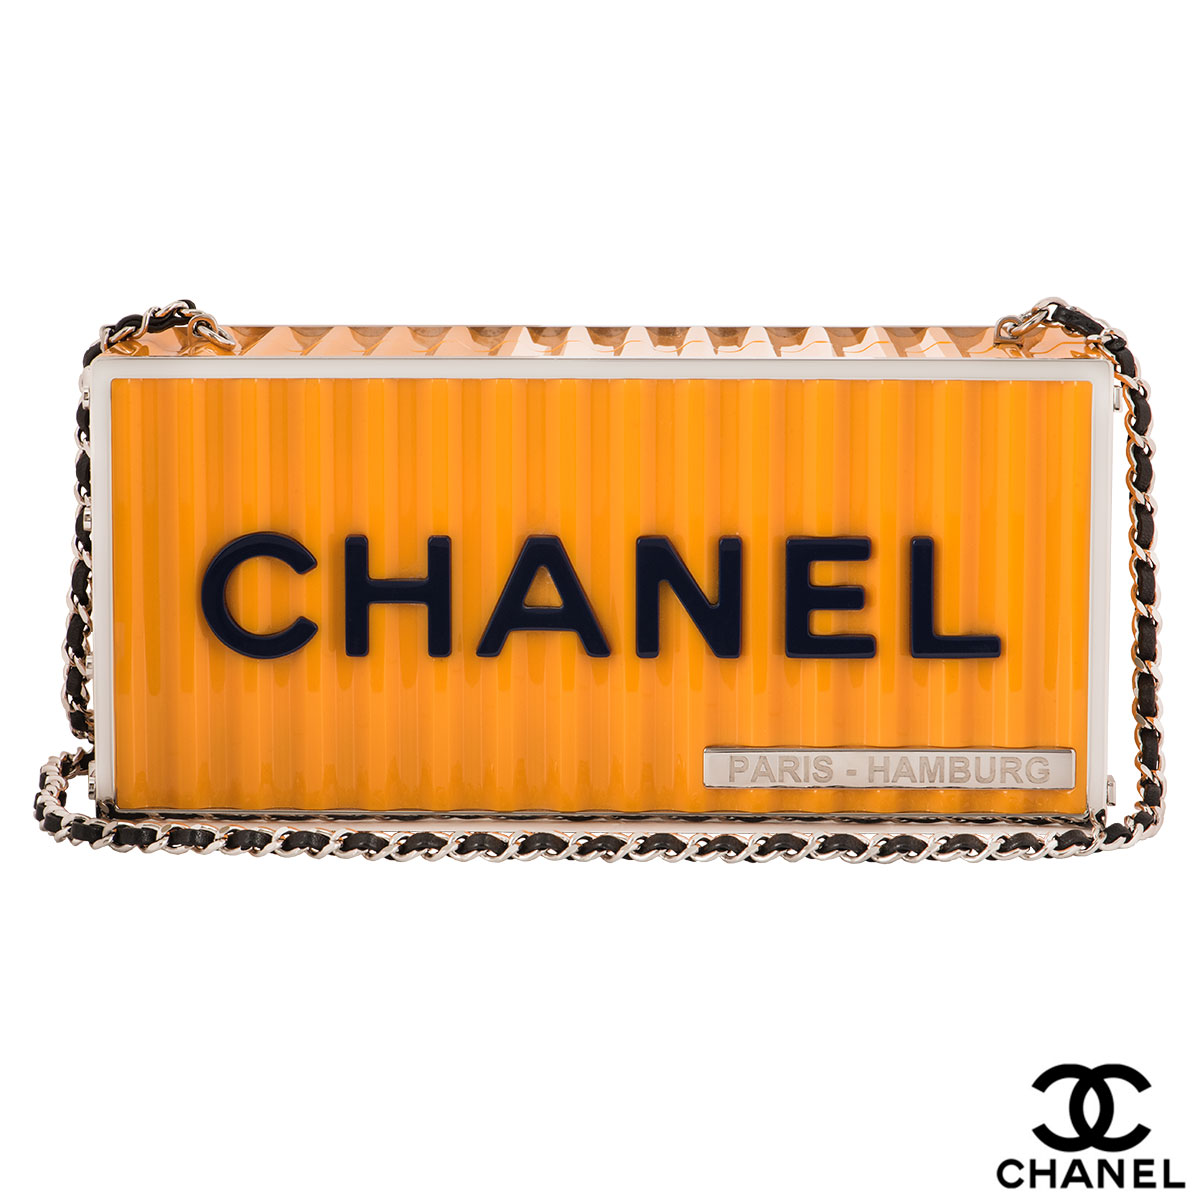 chanel container